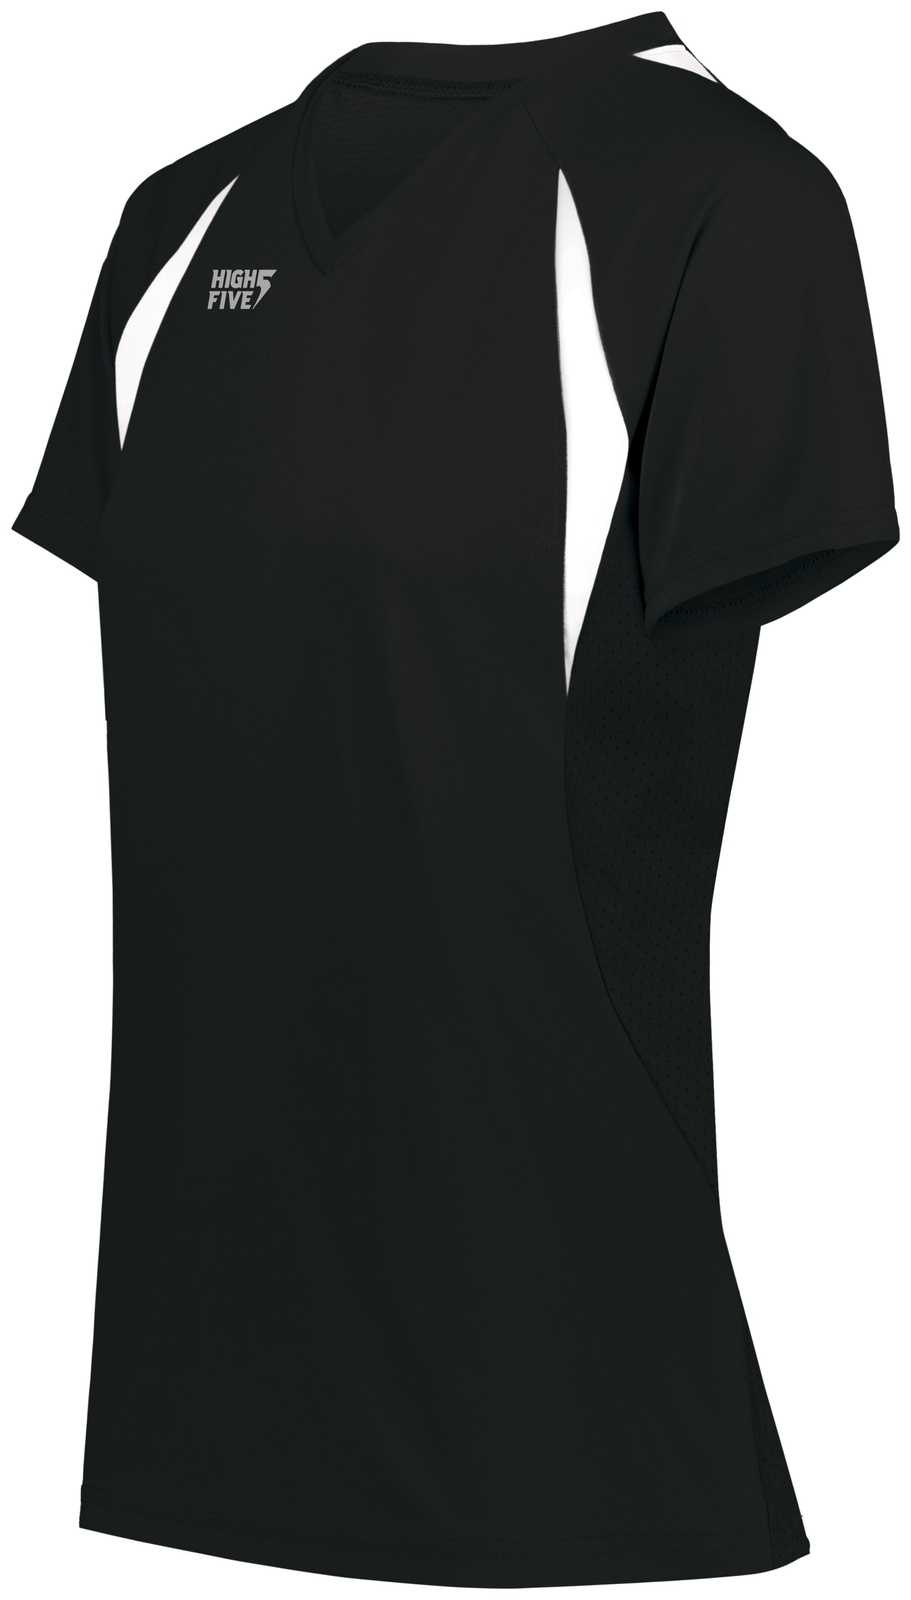 High Five 342232 Ladies Color Cross Jersey - Black White - HIT a Double